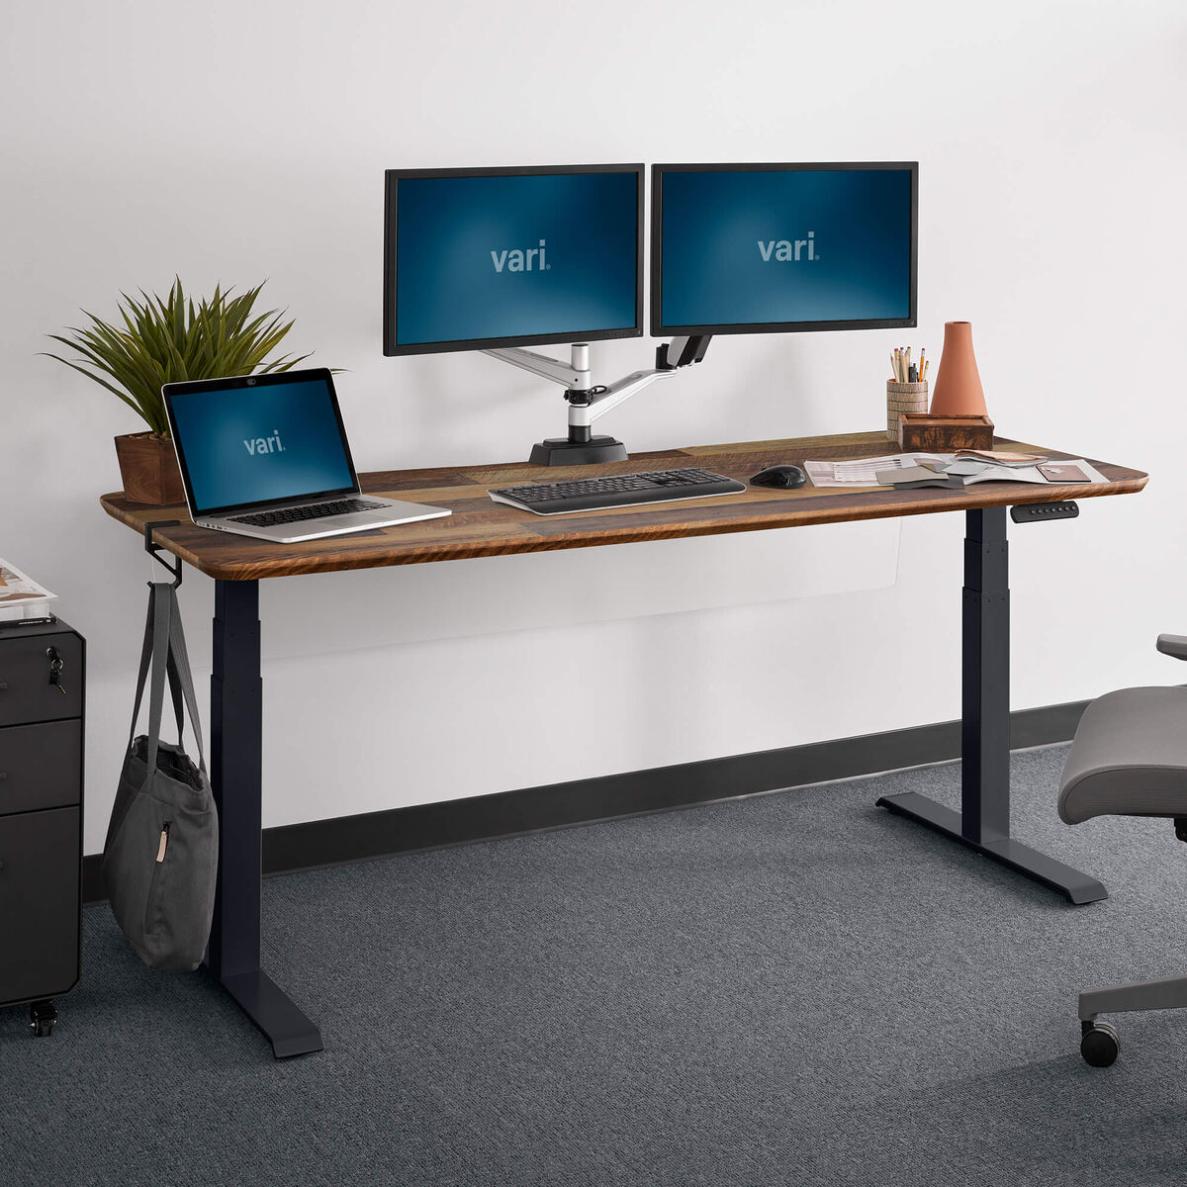 Electric Height Adjustable Desks: How to Choose the Right One for You?